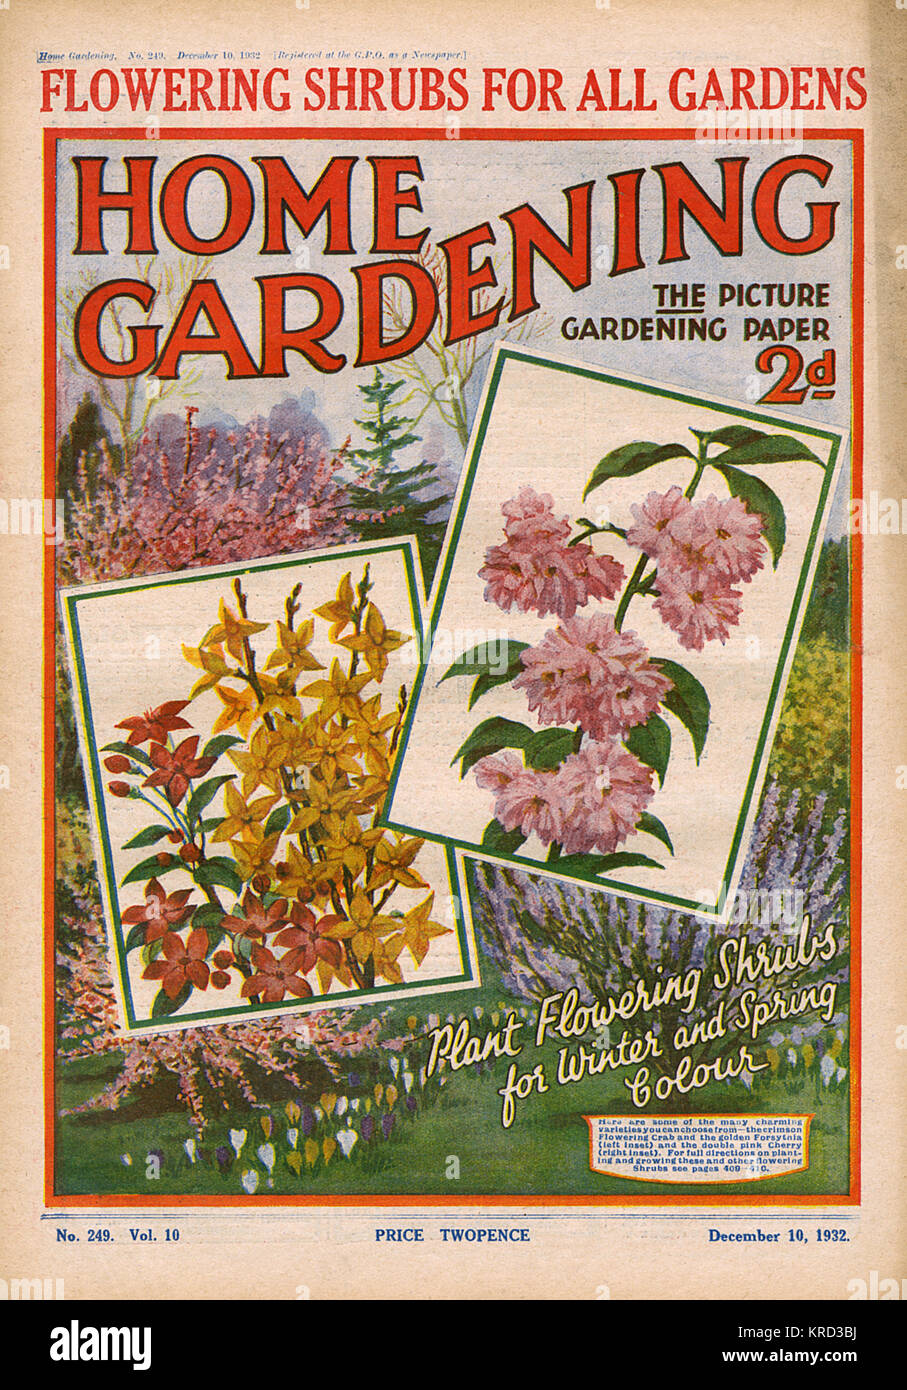 Front cover of Home Gardening magazine for December 1932 advising readers to plant flowering shrubs for winter and spring colour.  Inset pictures show early blooming forsythia and pink cherry blossom.       Date: 1932 Stock Photo